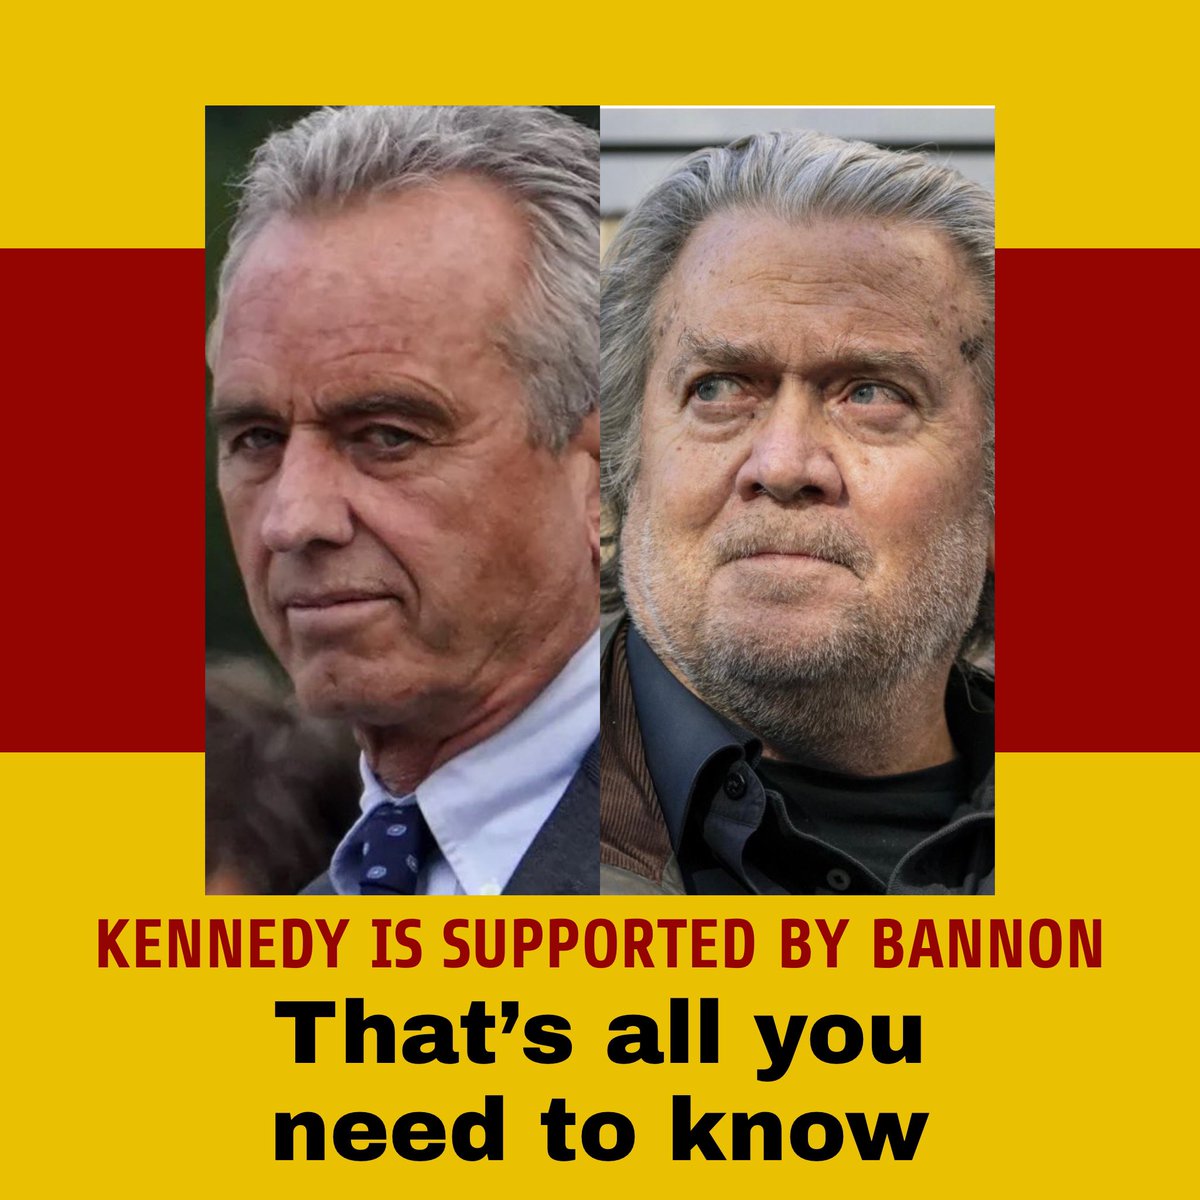 Robert F. Kennedy Jr. is supported by Steve Bannon. Joe Rogan and Elon Musk are promoting him. RFK Jr. is not a true Democrat; he is a plant. He opposes an assault weapons ban and spreads pro-Russian talking points about the war in Ukraine. I support President Joe Biden.